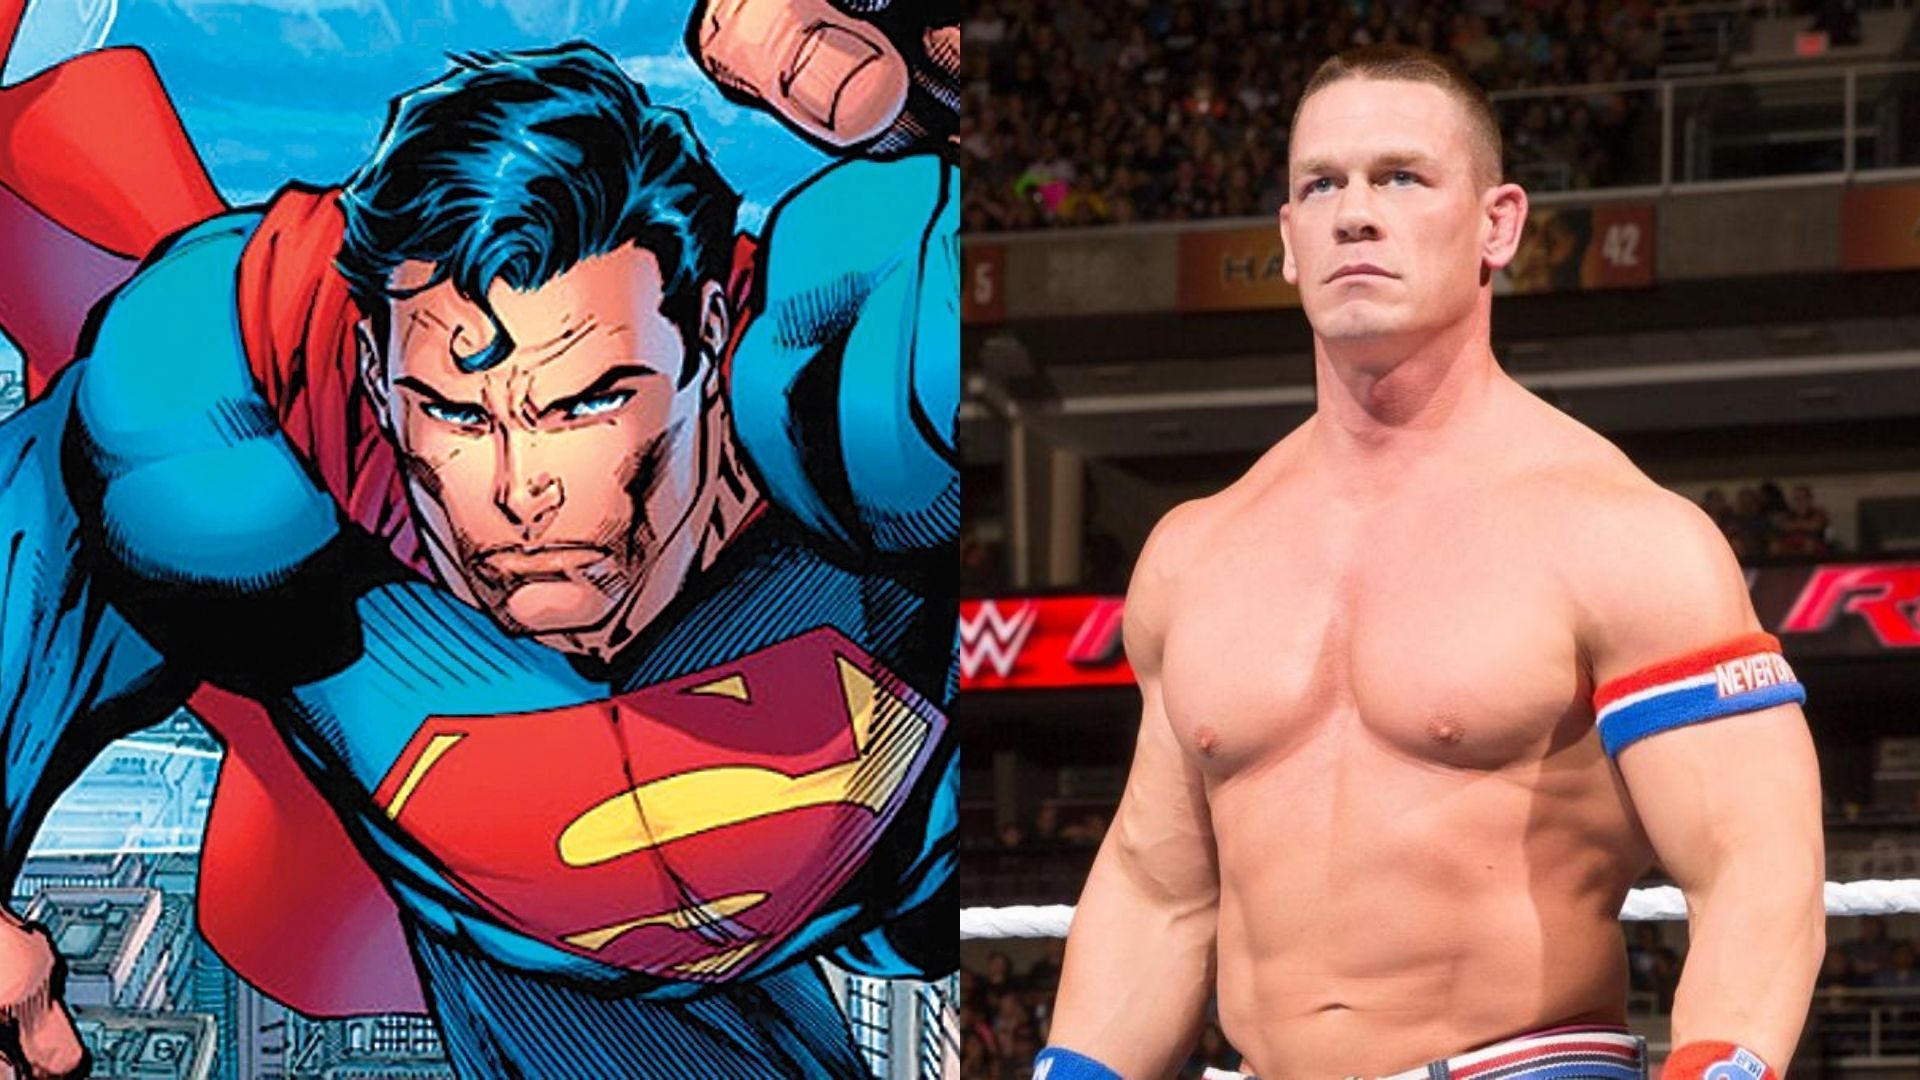 Some DC characters have very similar WWE counterparts